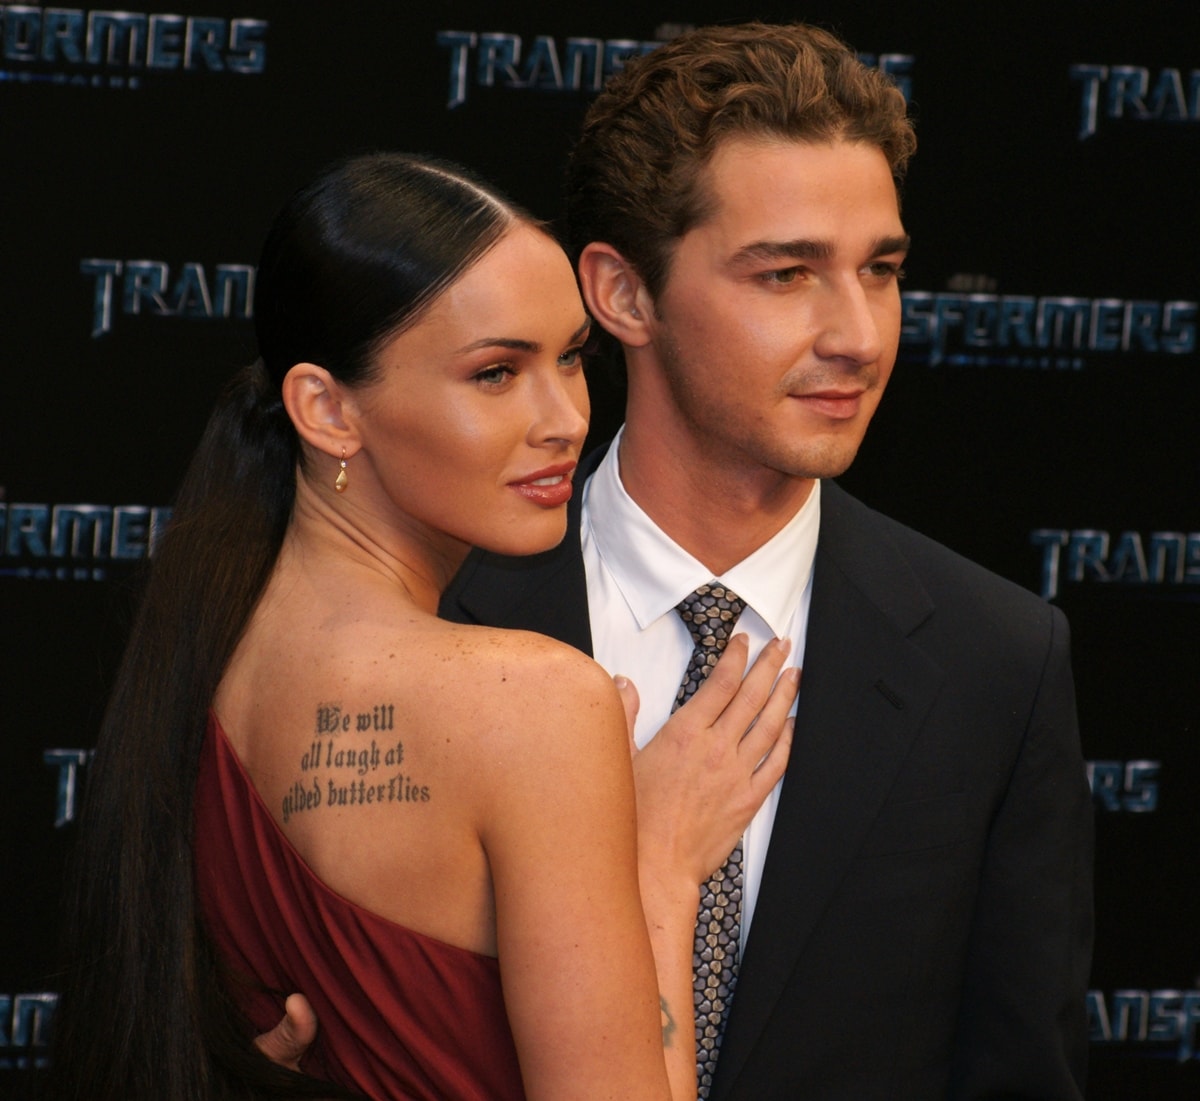 Shia LaBeouf and Megan Fox attend the German premiere of Transformers: Revenge Of The Fallen